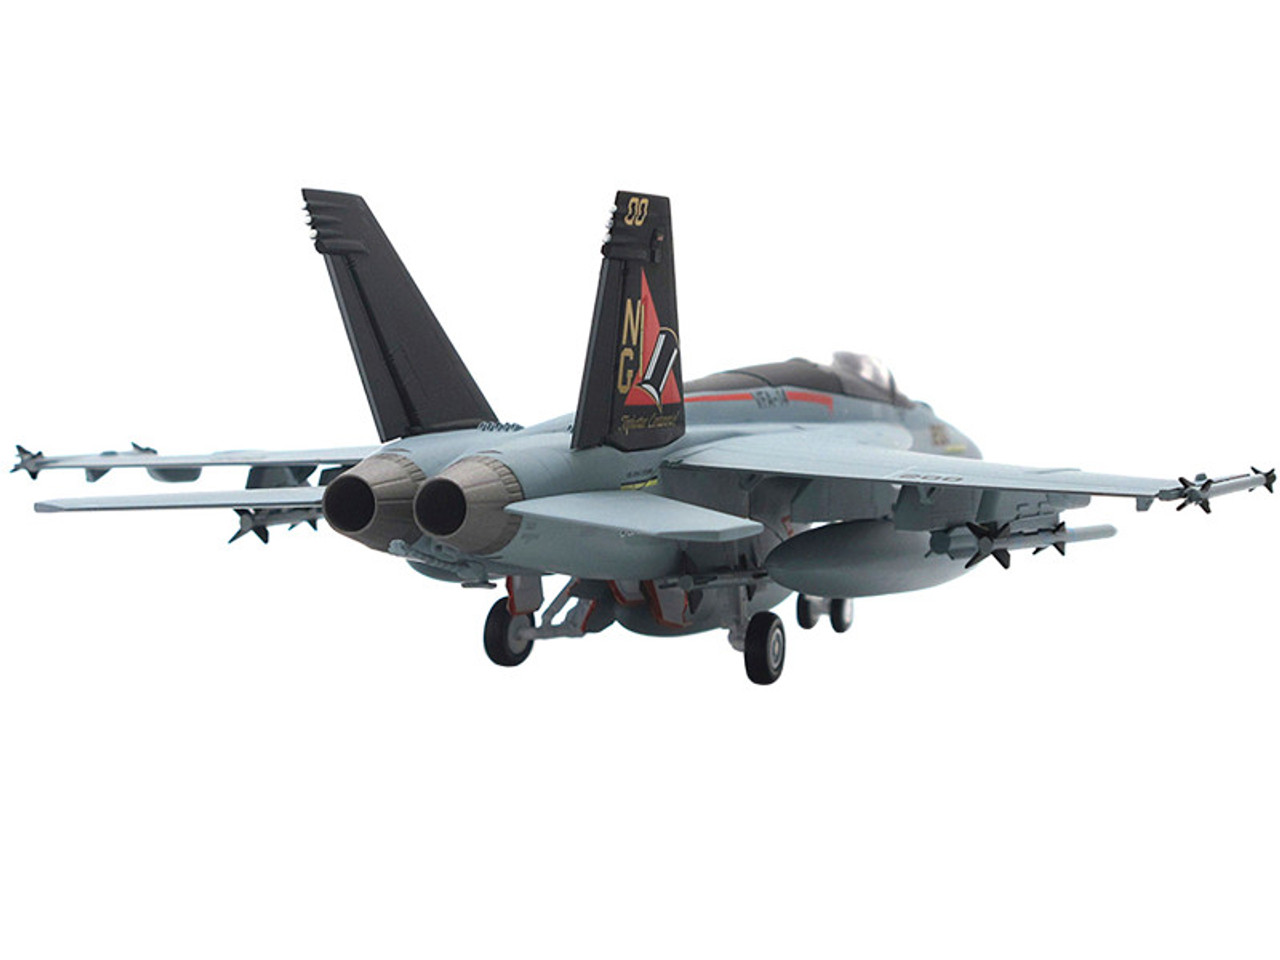 McDonnell Douglas F/A-18E Super Hornet Fighter Aircraft US Navy "100th Anniversary Edition" "VFA-14 Tophatters" (2019) Limited Edition to 600 pieces Worldwide 1/72 Diecast Model by JC Wings